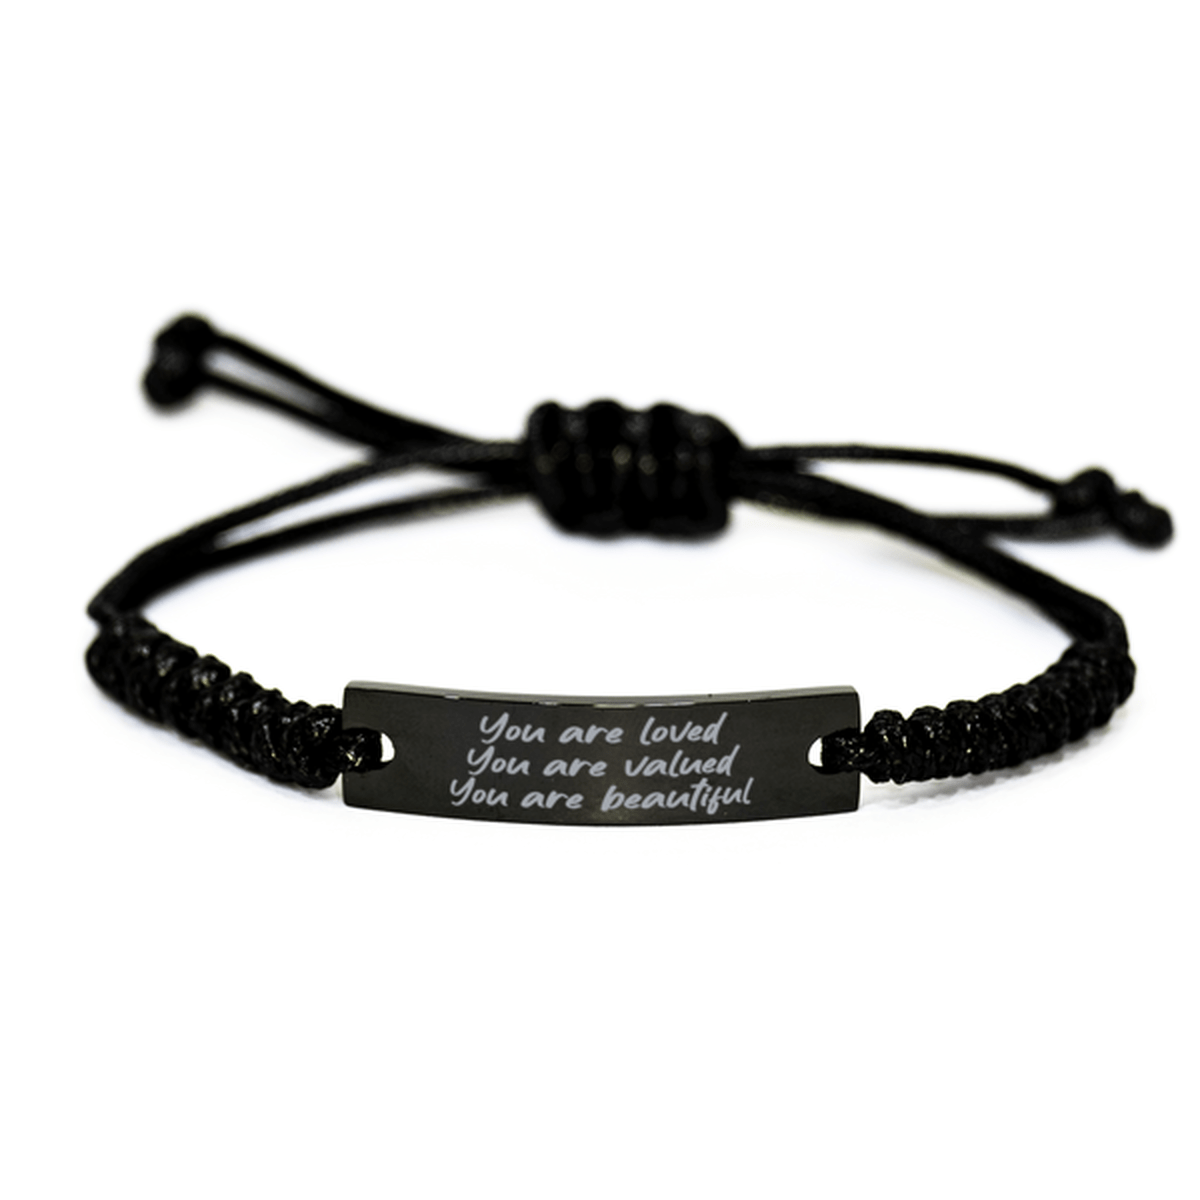 You are loved - You are valued - You are beautiful - Inspirational Bracelet - Gifts for Women